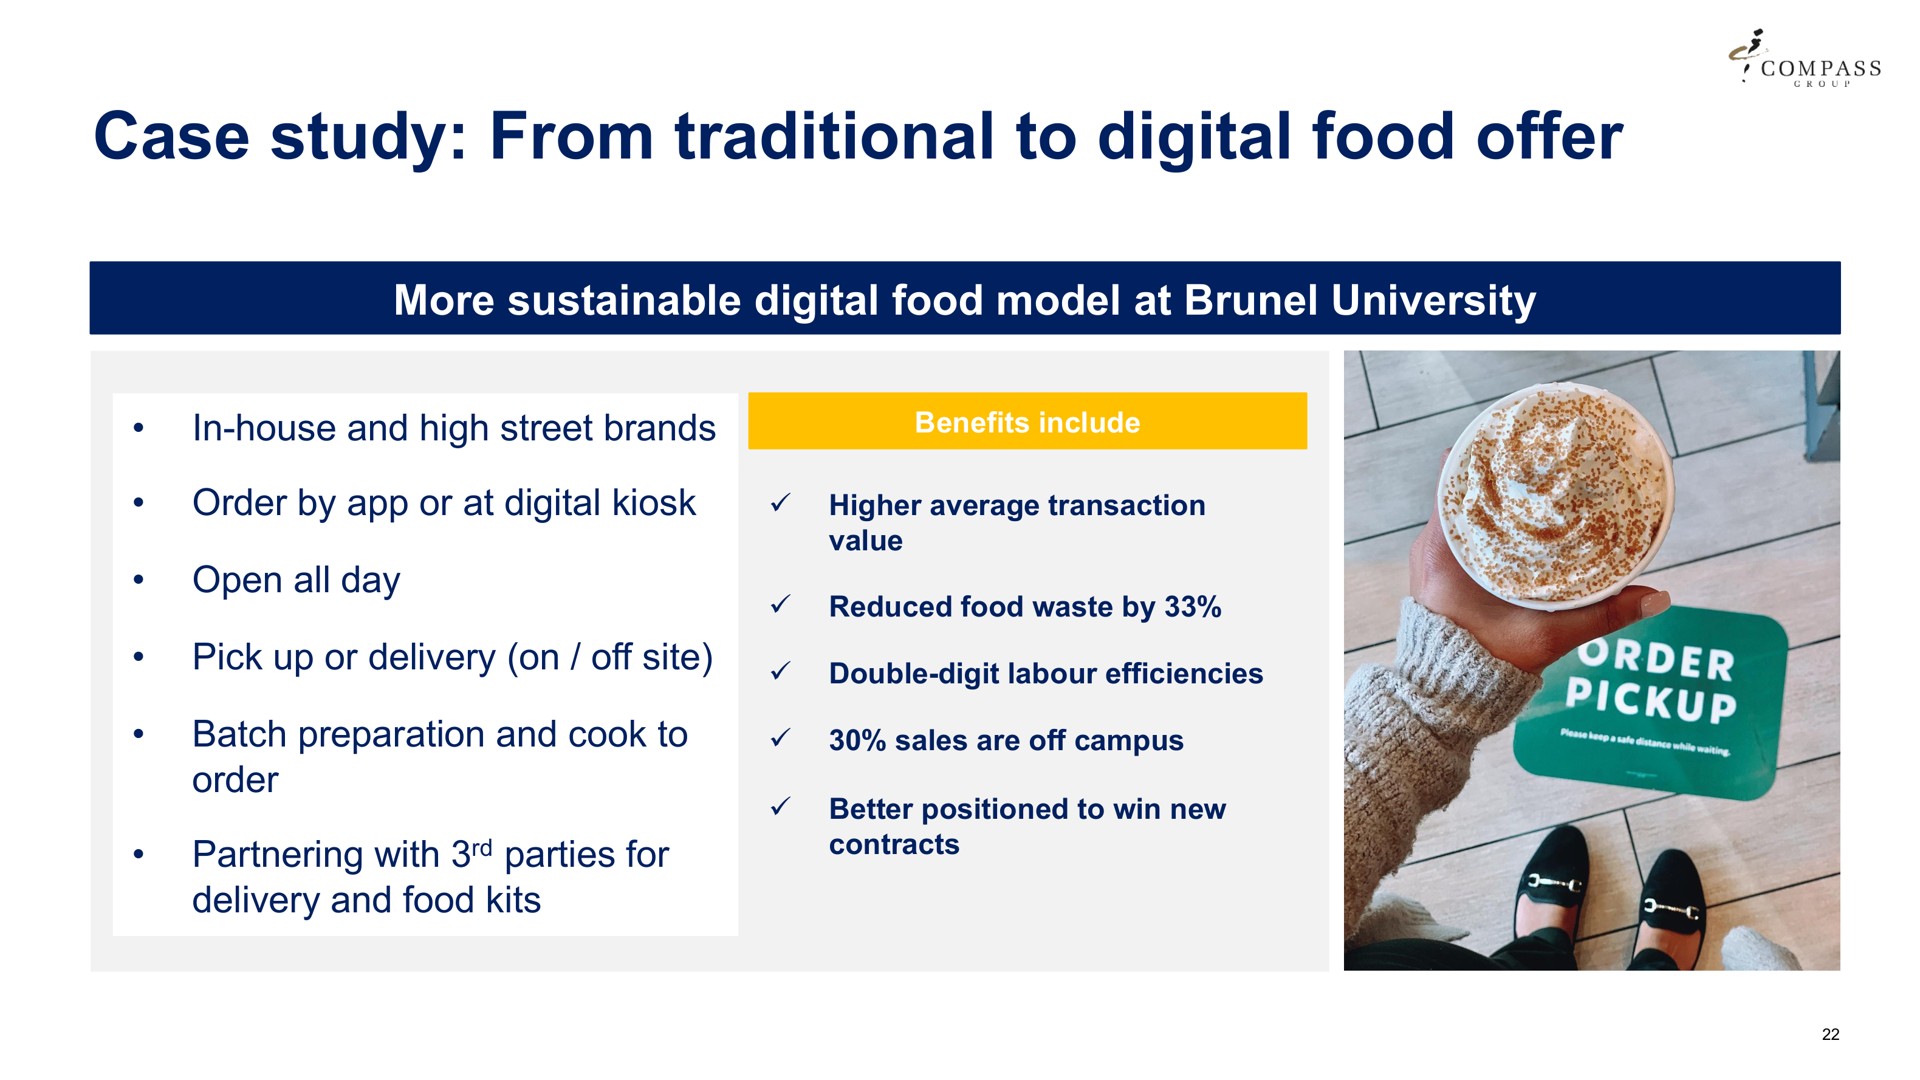 case study from traditional to digital food offer | Compass Group